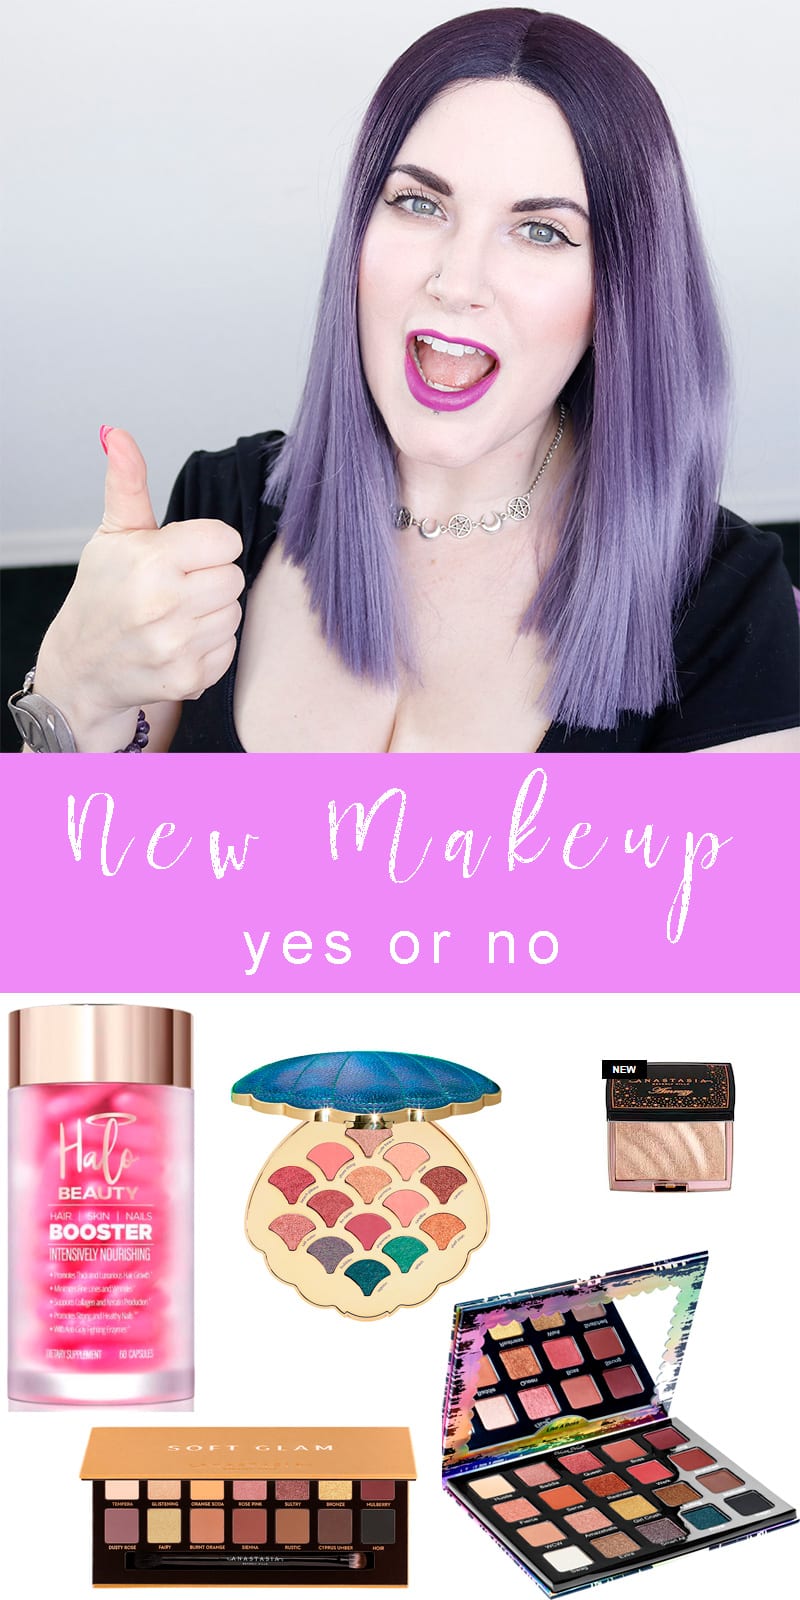 New Makeup Releases - Going on the Wishlist or Nah? - See if these new cruelty free makeup releases will make it home to me!